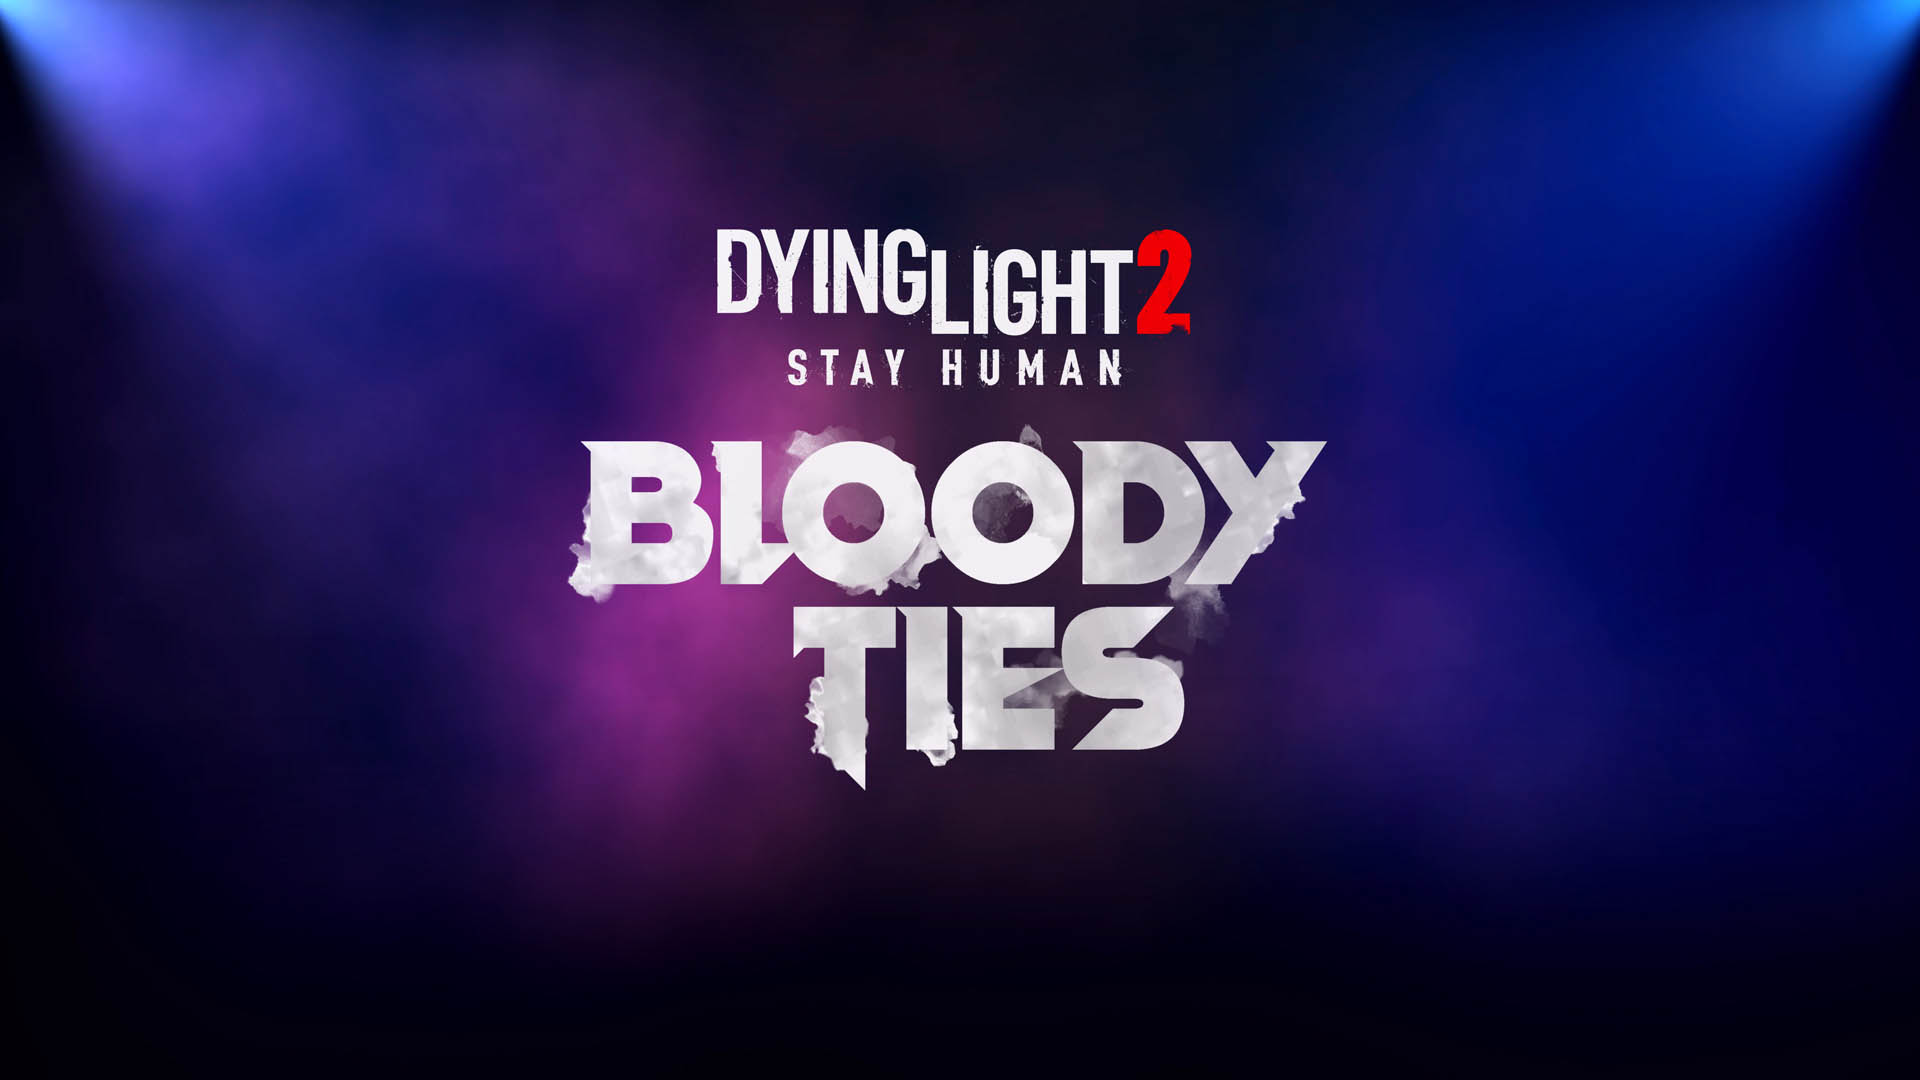 Dying Light 2: Stay Human Bloody Ties DLC to be revealed at Gamescom Opening Night Live